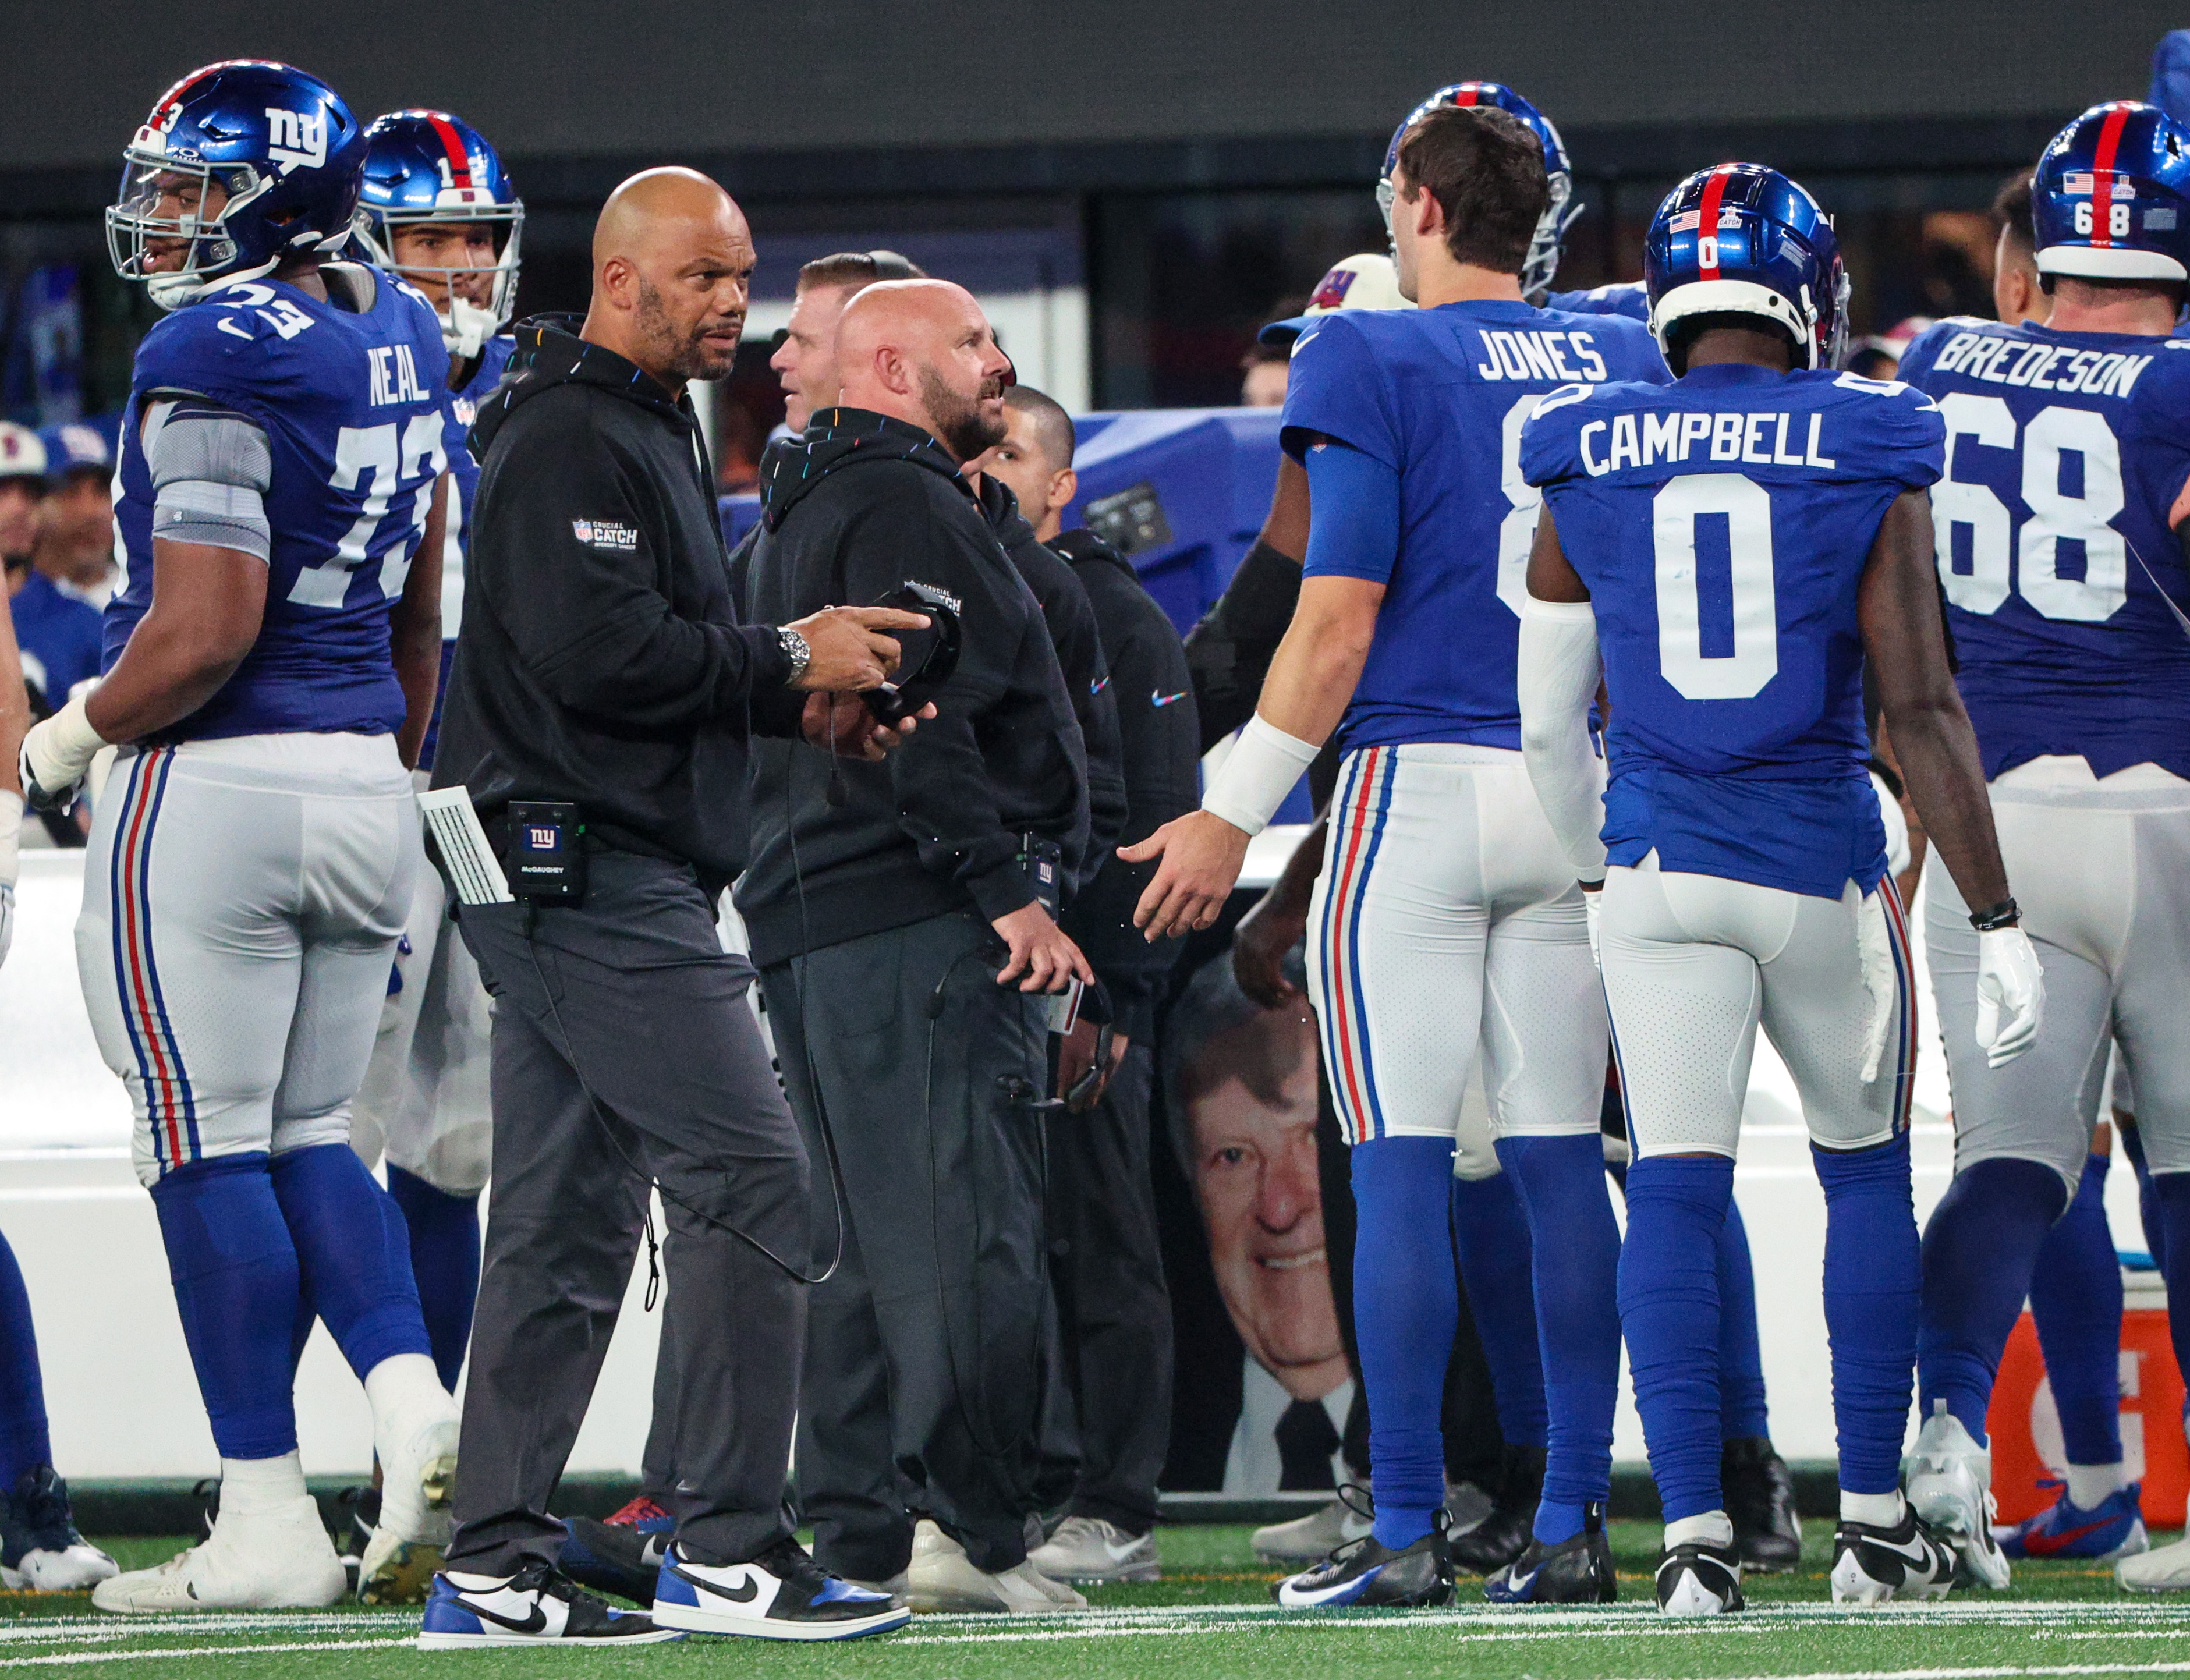 Giants booed off field after first-half flop on their way to